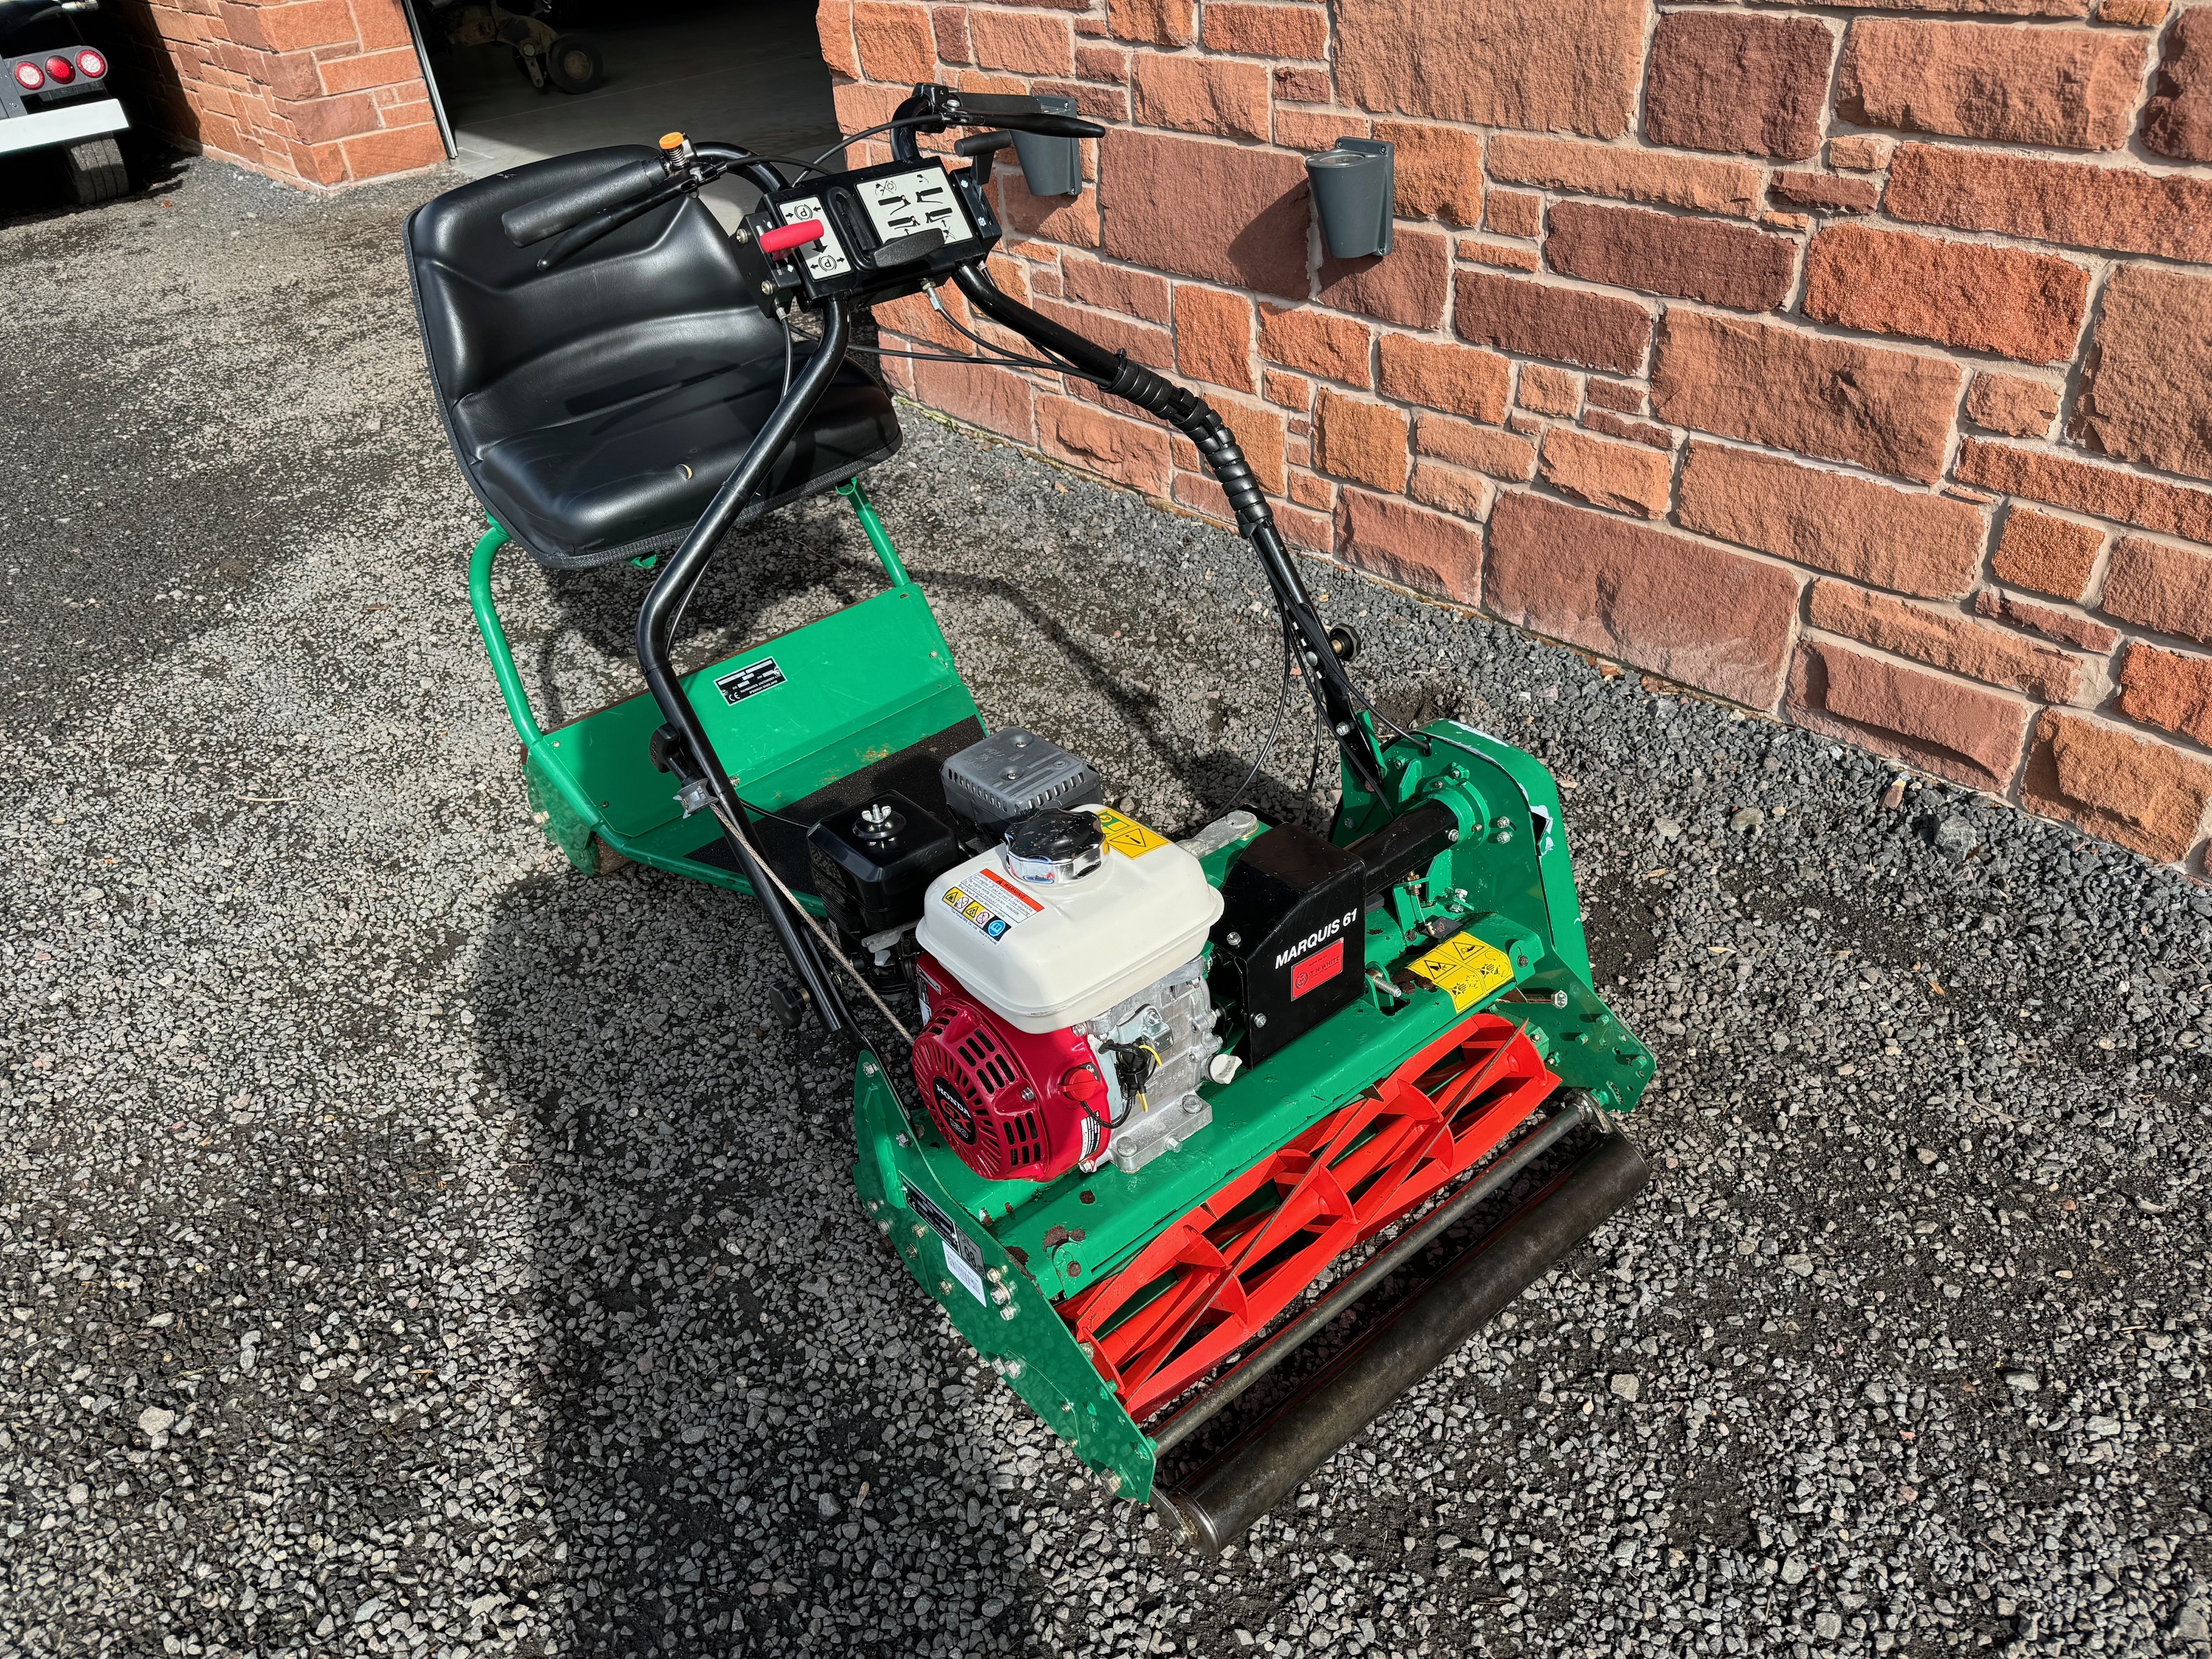 Ransomes marquis 61 cylinder mower with rollor seat